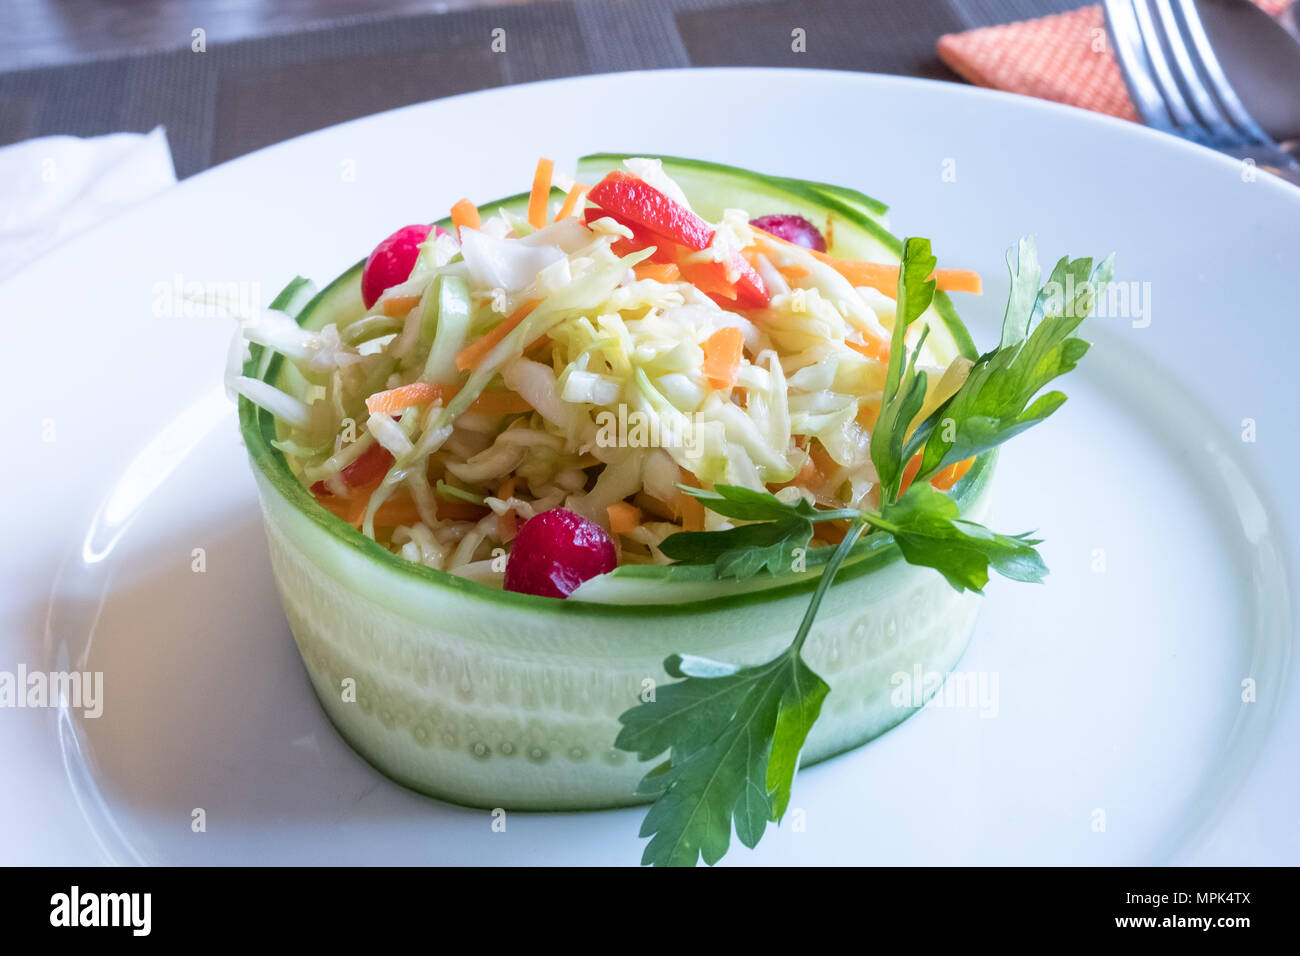 Salad from raw cabbage, carrot, pepper, cucumber and cranberries on a white plate Stock Photo